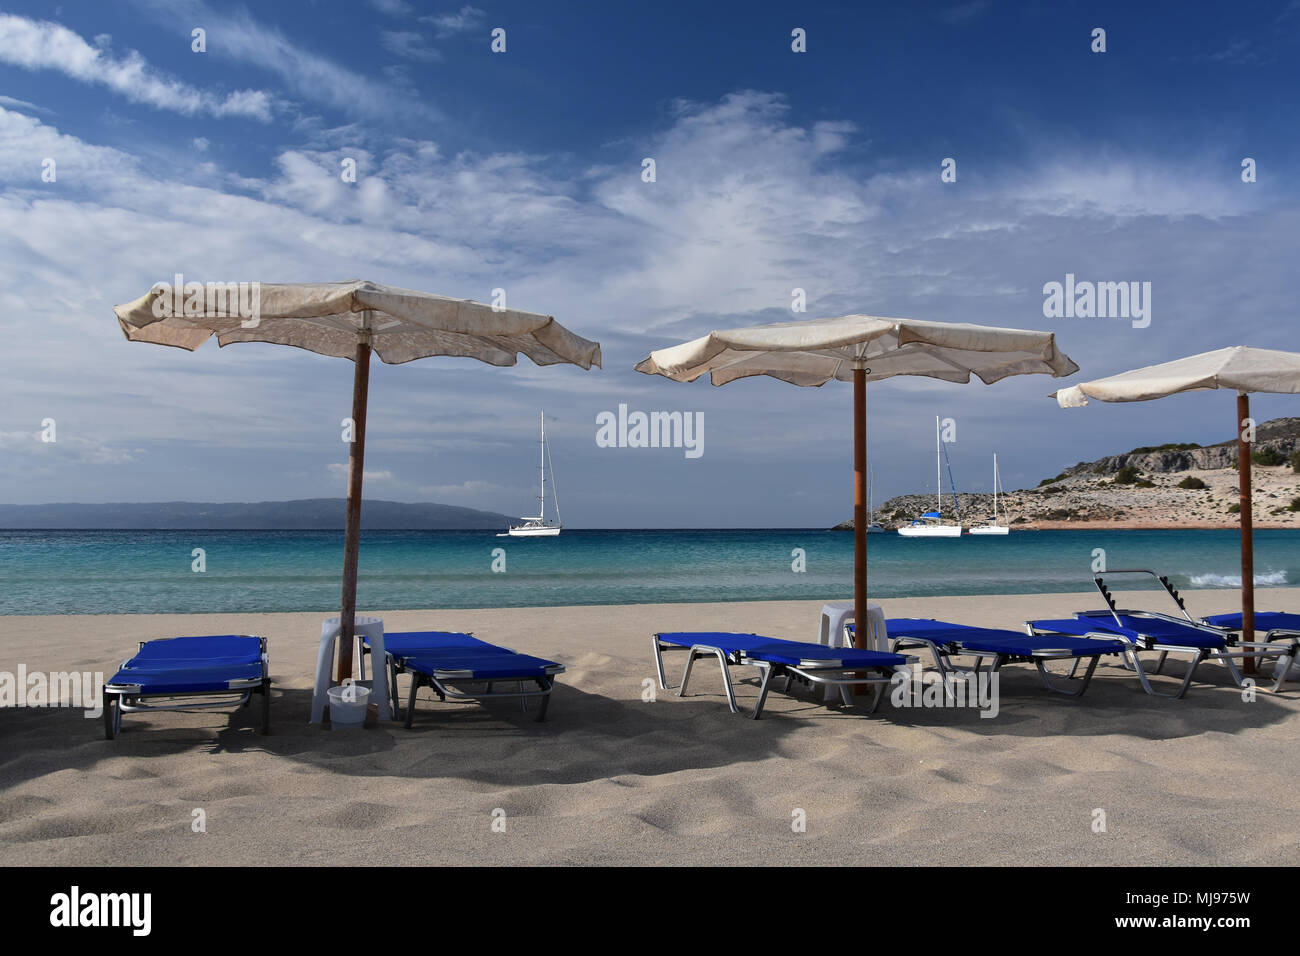 Wide sandy beach with old umbrellas and empty chaise longue, quiet turquoise sea, white yachts in the bay, cirrus clouds at sky Stock Photo